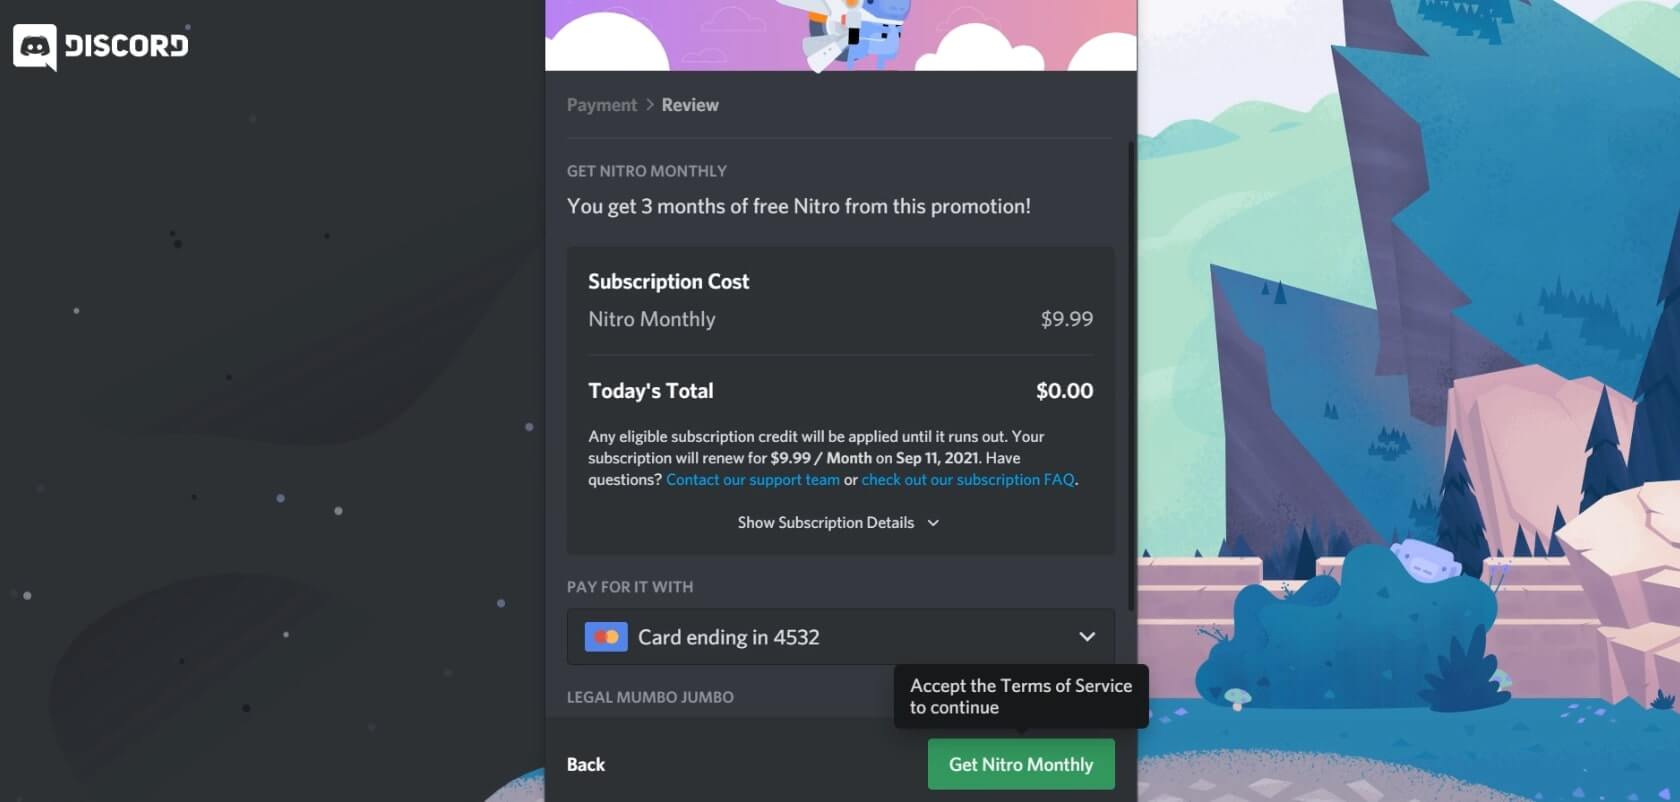 How To Get Discord Nitro For Free Without Epic Games